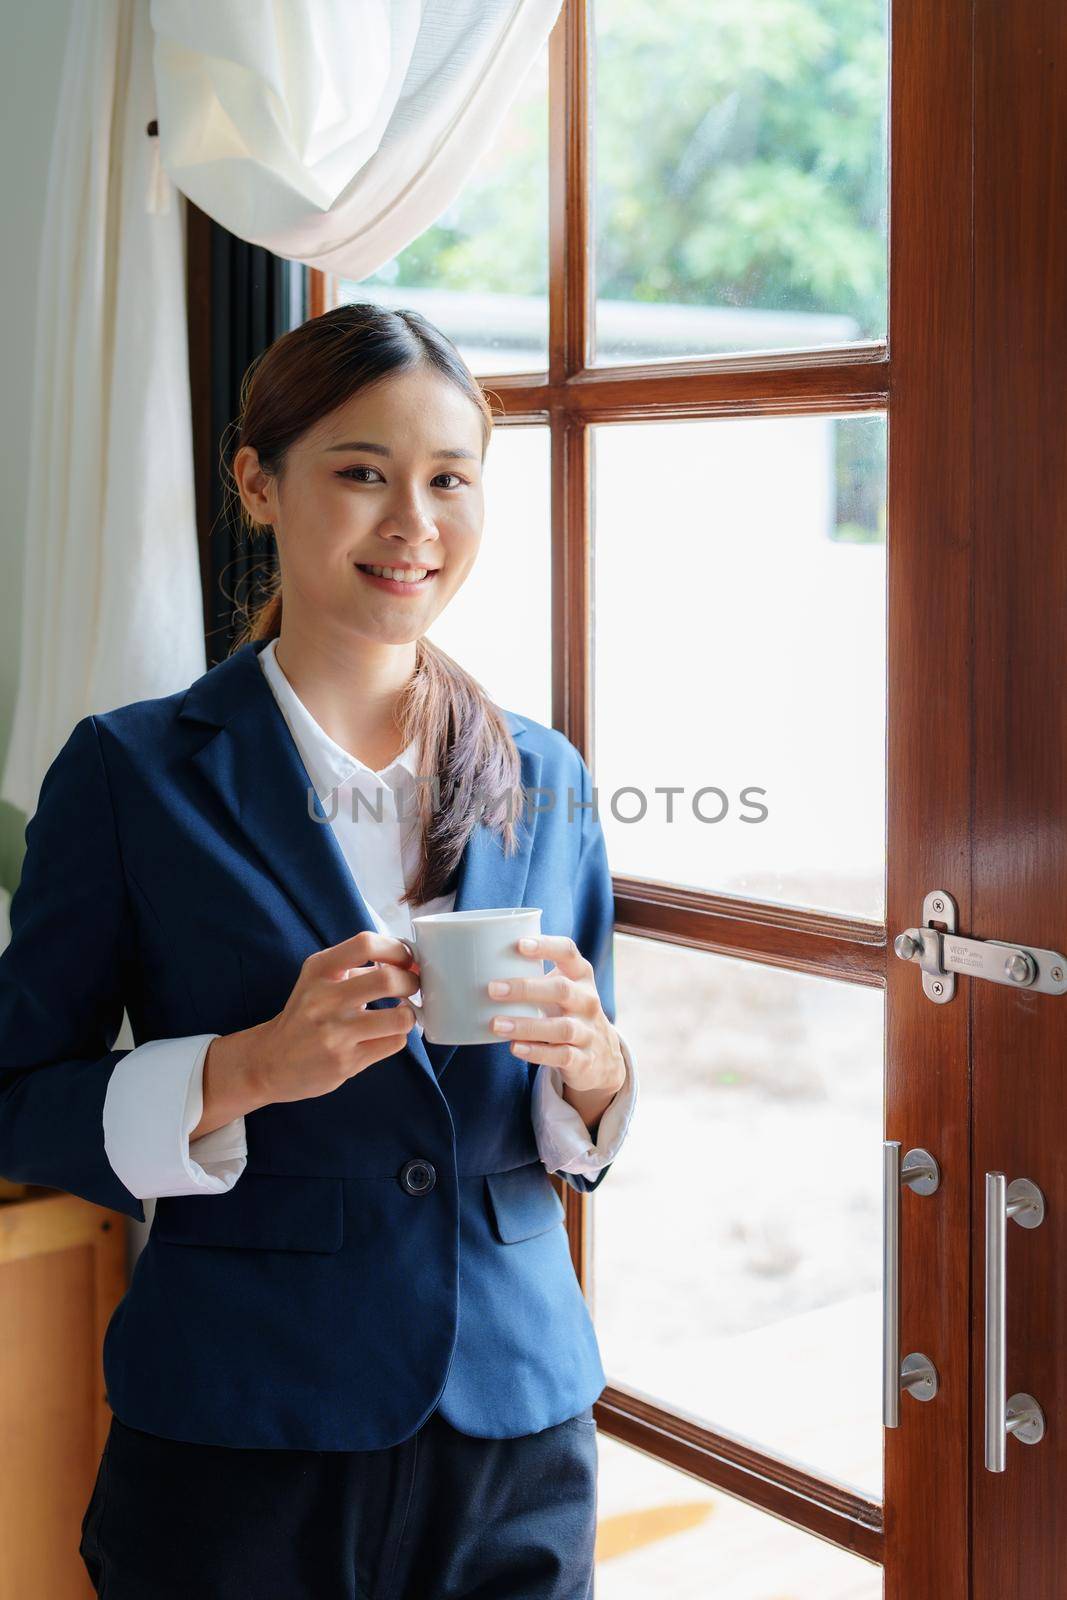 A portrait of an Asian businesswoman showing a happy smiling face holding a cup of coffee during a break.